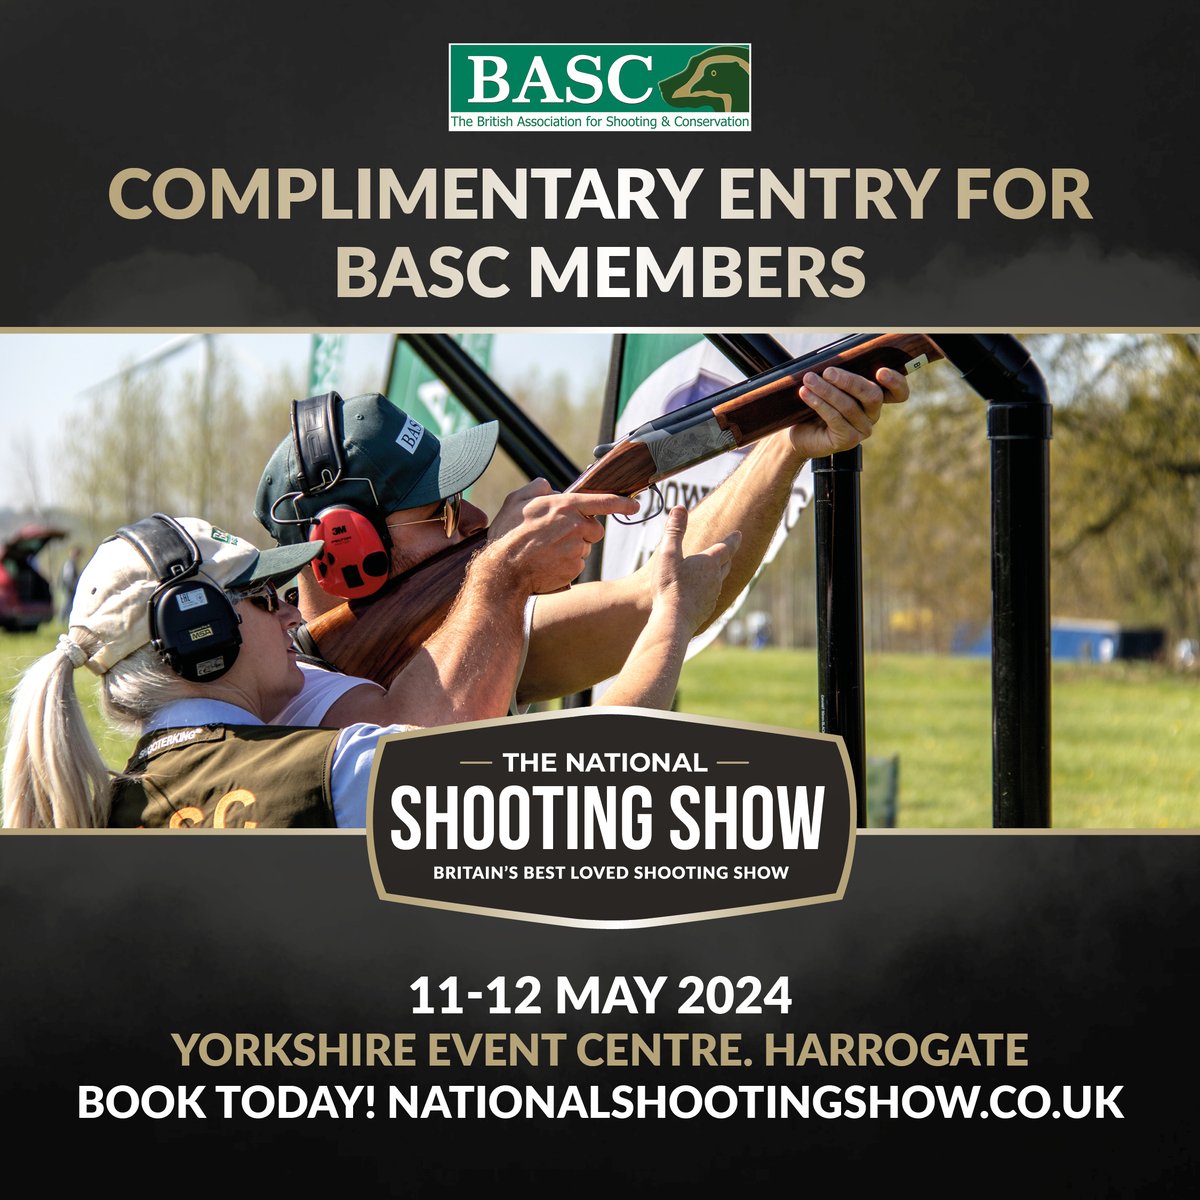 We'll be running a BASC shotgun shooting line at the @National_shoot Show? You will be able to smash your first clays or improve your skills with qualified BASC shotgun coaches. Don't forget to get your complimentary tickets to the show: orlo.uk/SIGN_UP_HERE_t…